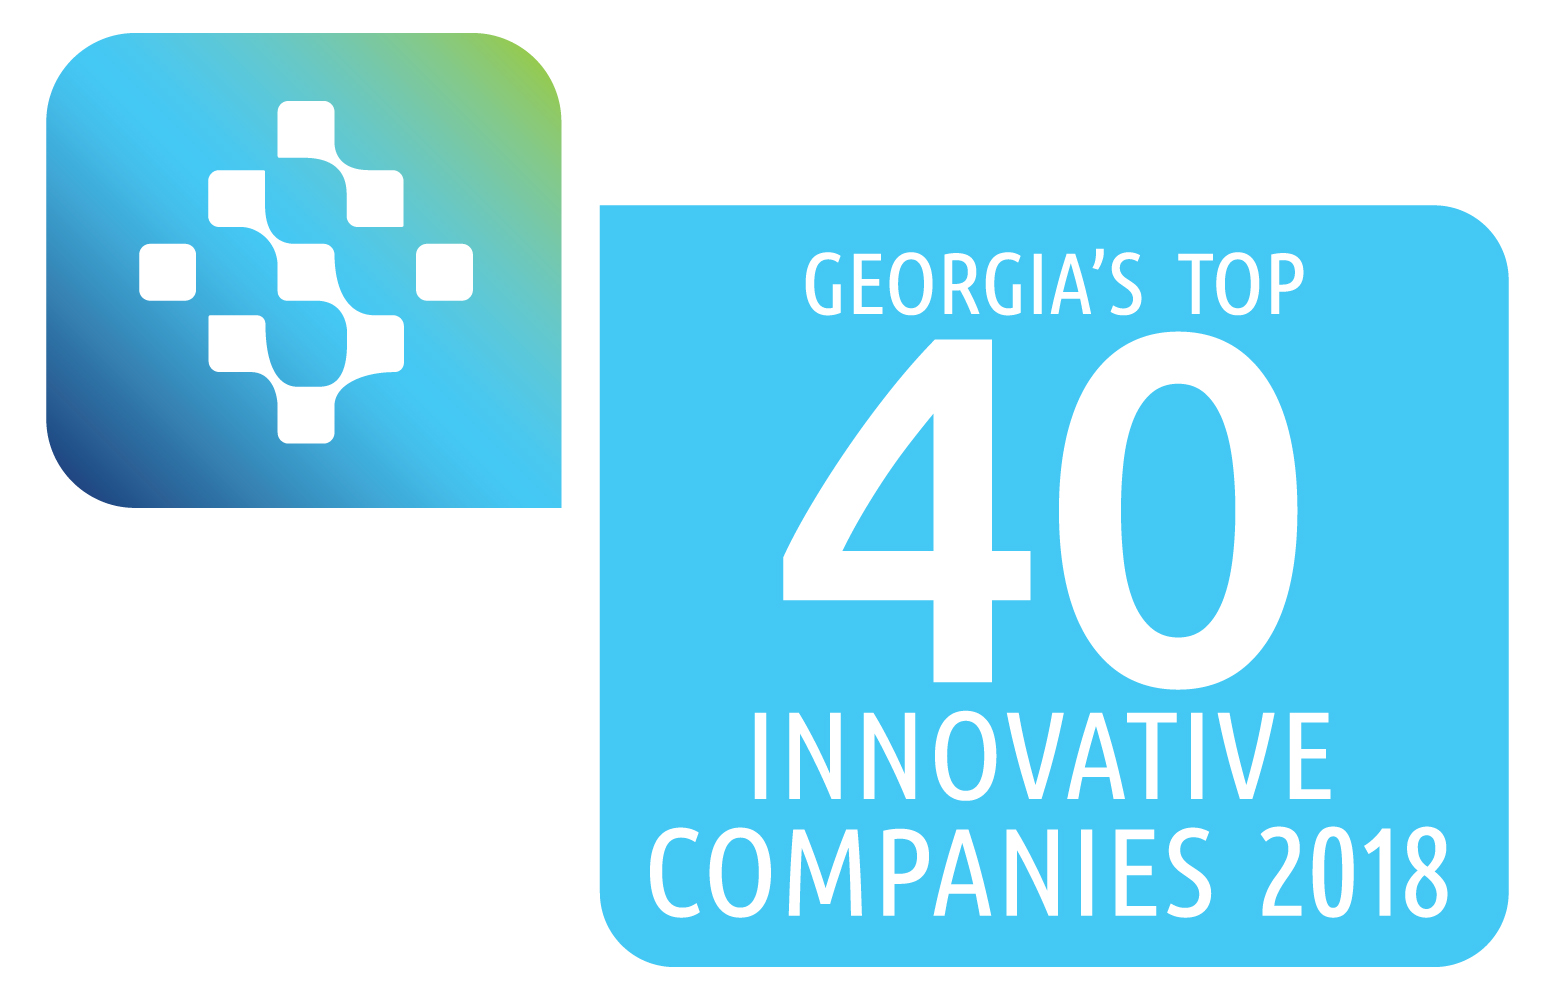 DECISELY NAMED A TOP 40 INNOVATIVE TECHNOLOGY COMPANY FOR THE 2nd YEAR